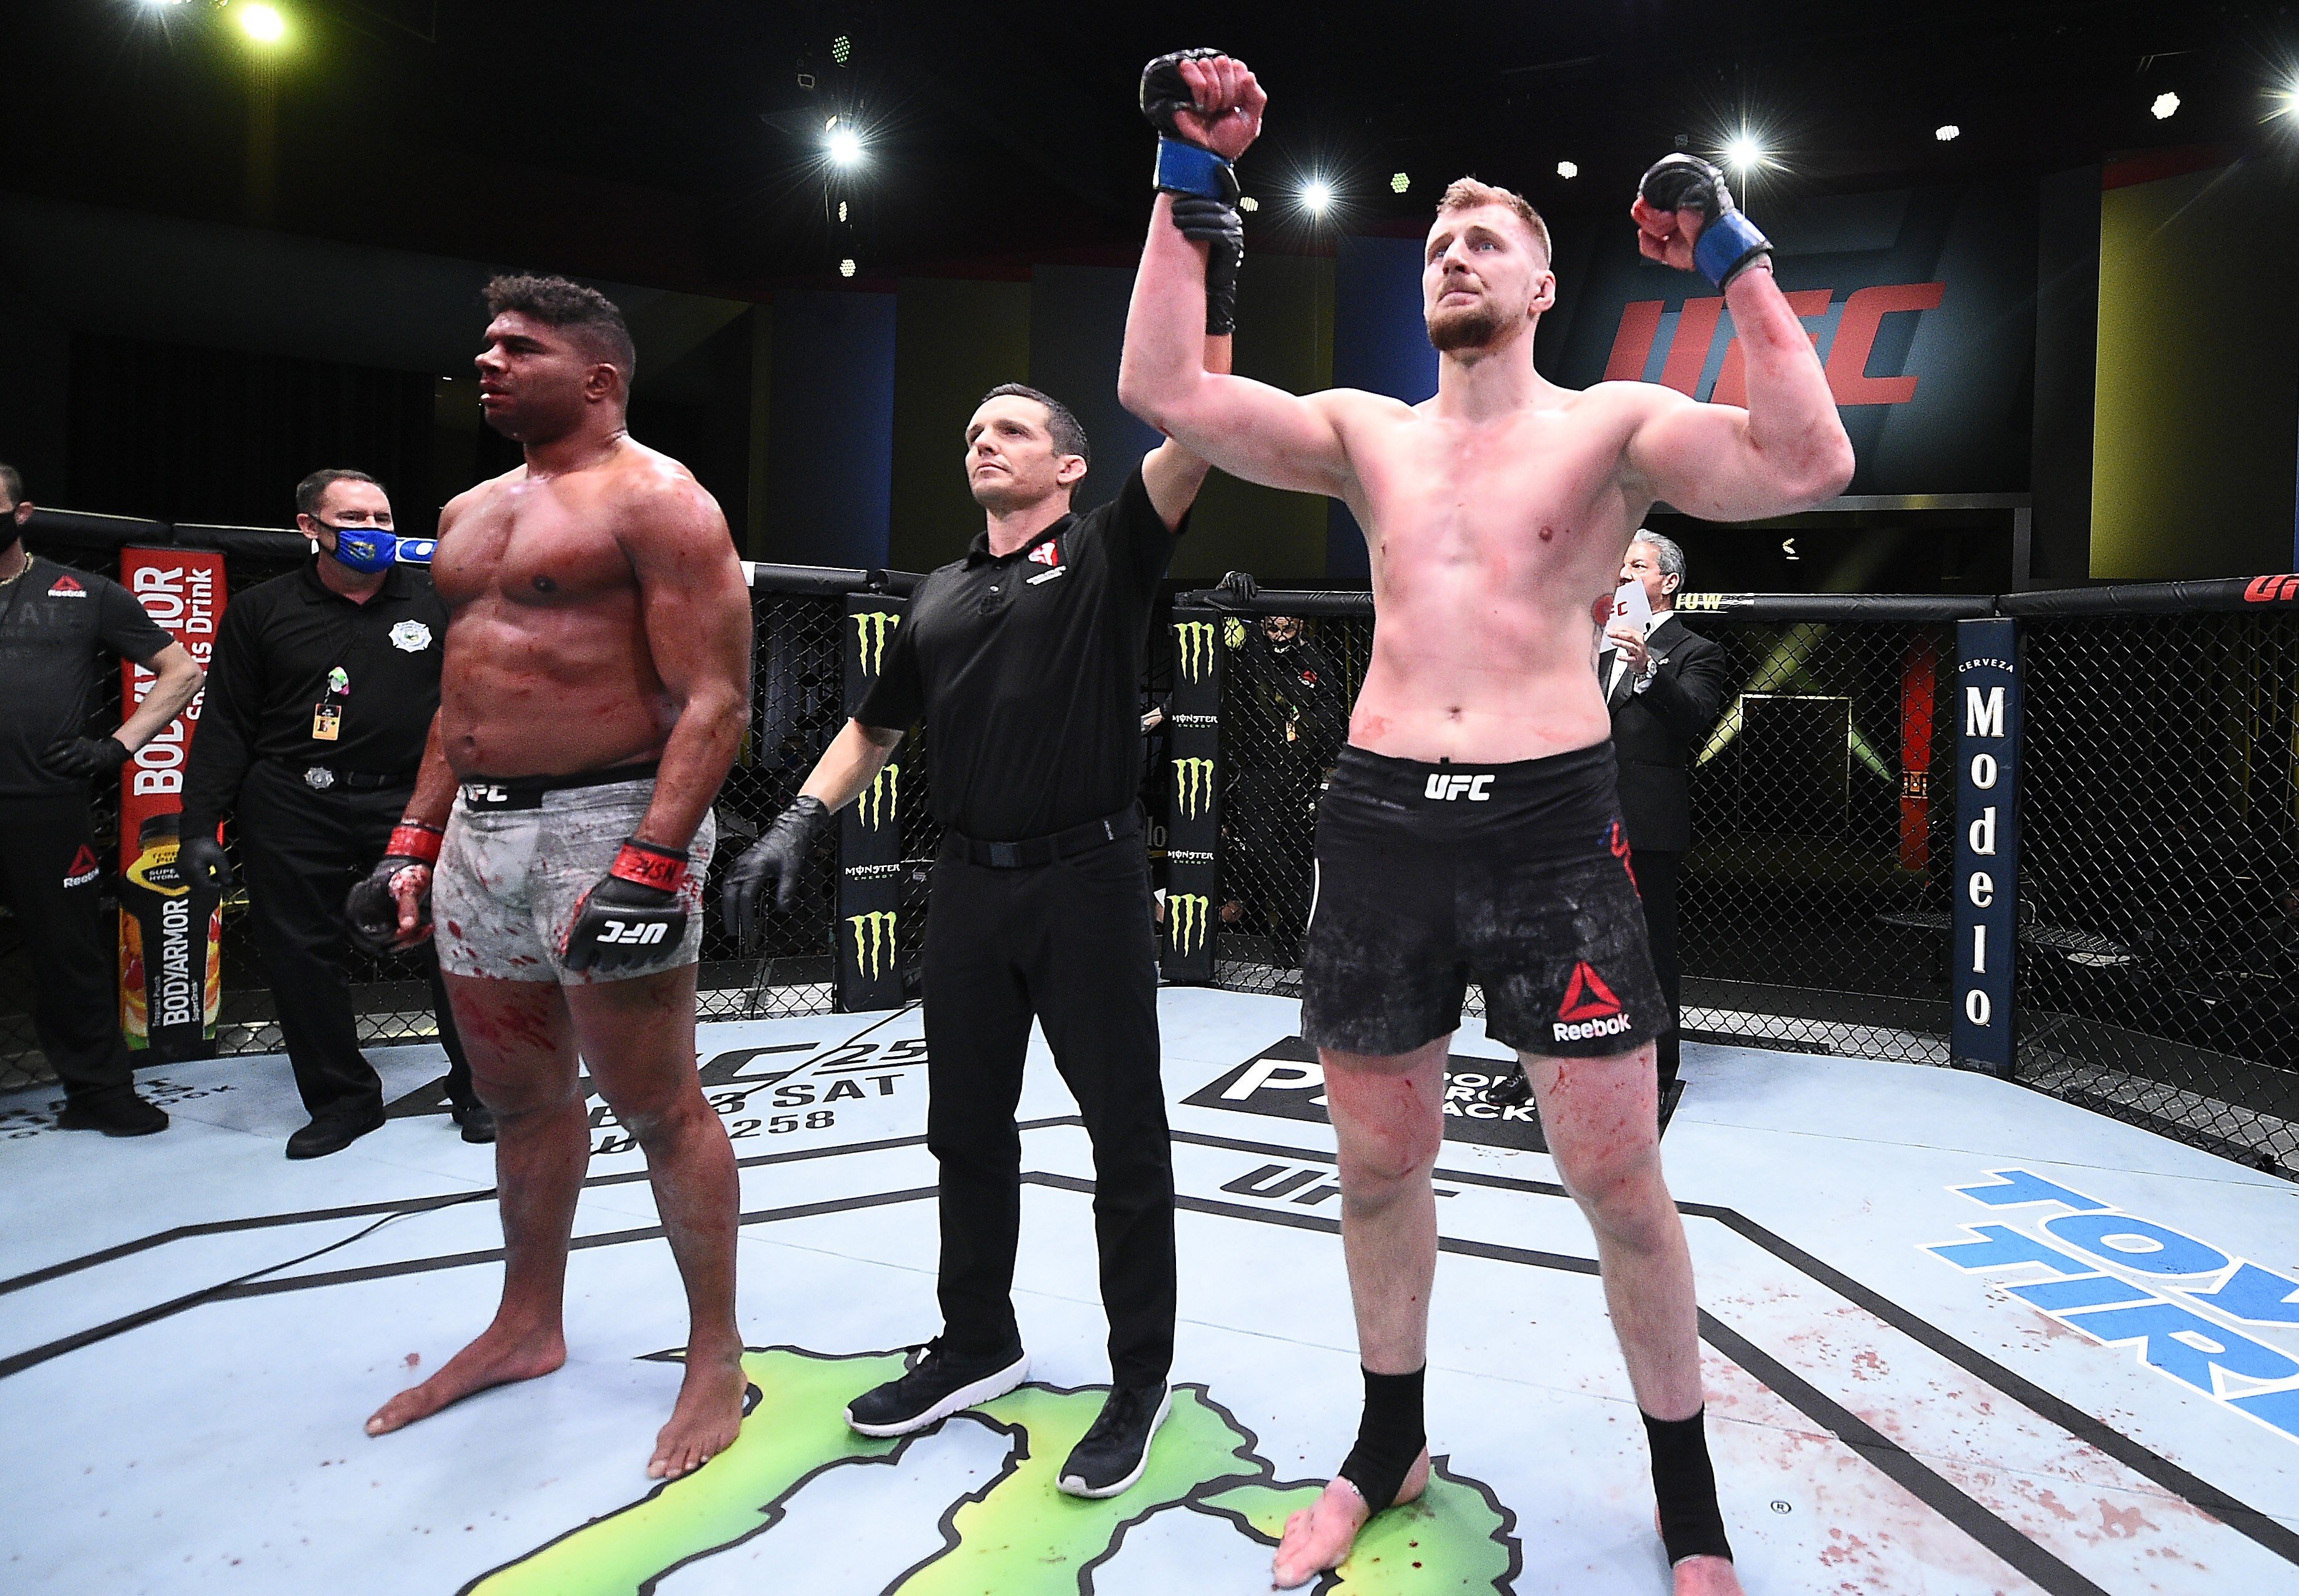 Alexander Volkov celebrates after his knockout victory over Alistair Overeem at UFC Vegas 18. Photos: Chris Unger/Zuffa LLC